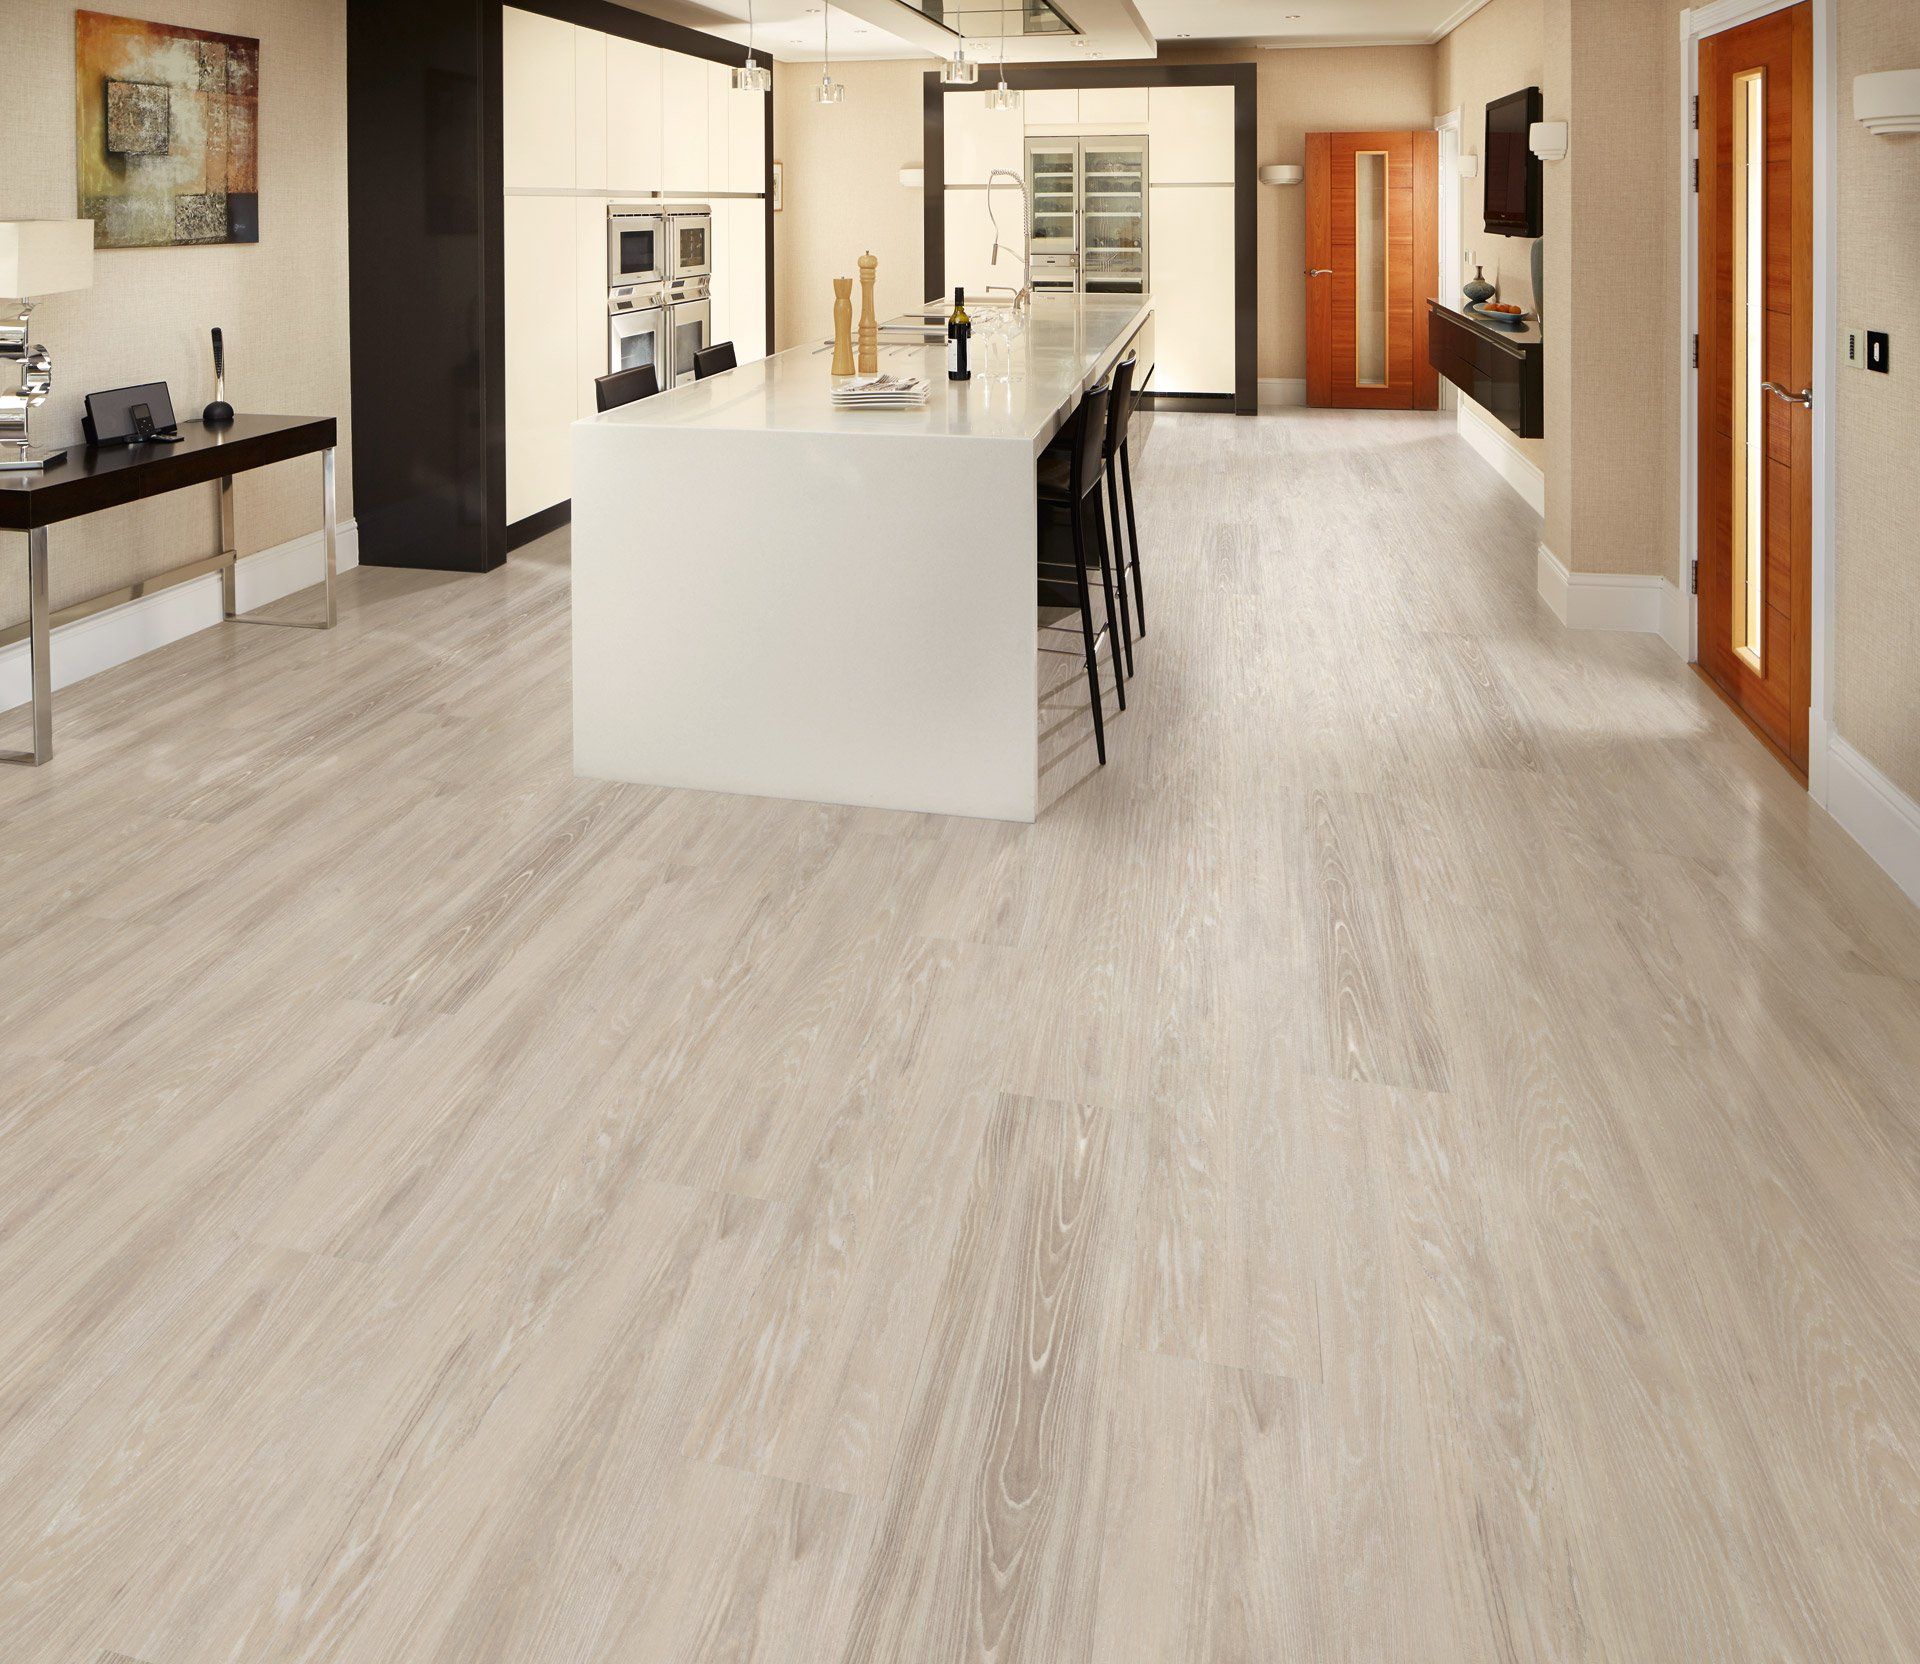 Caring for your Timber Floors